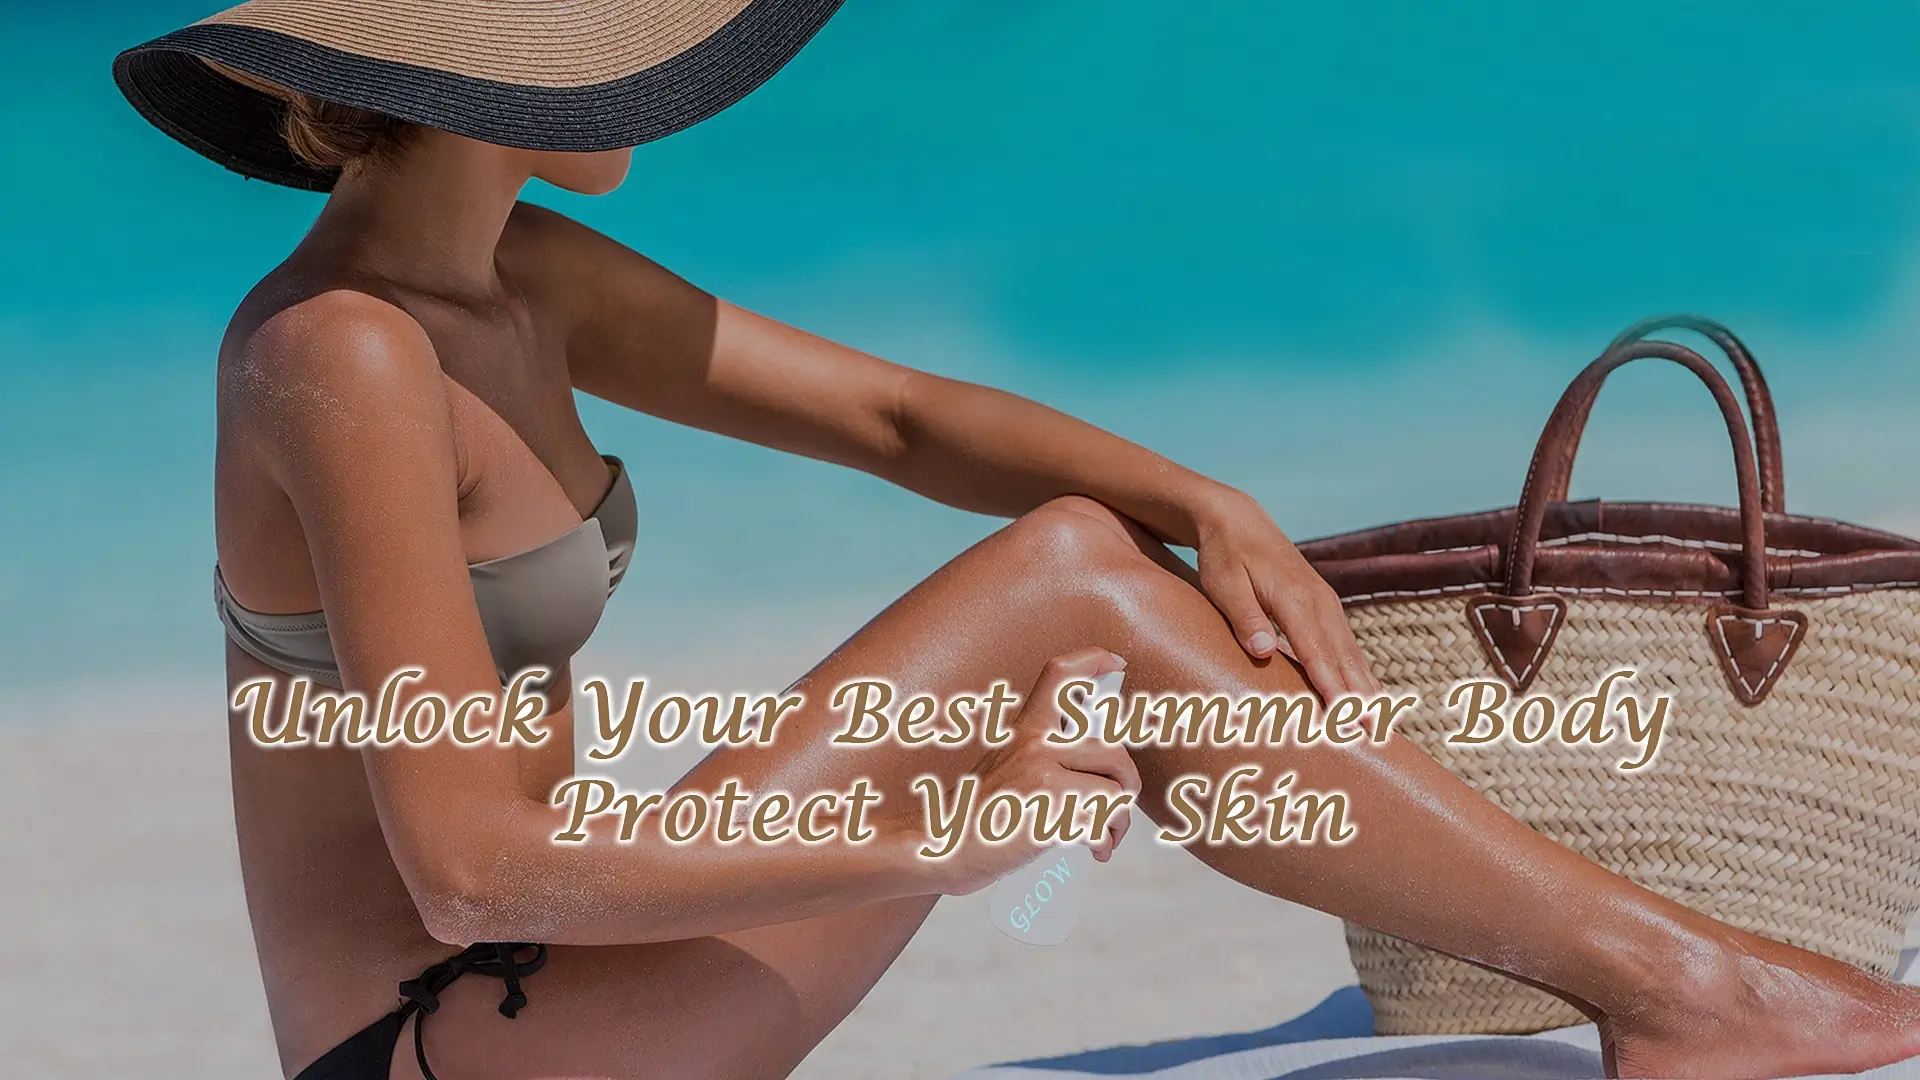 Top Tips And Tricks For Your Summer Body Care